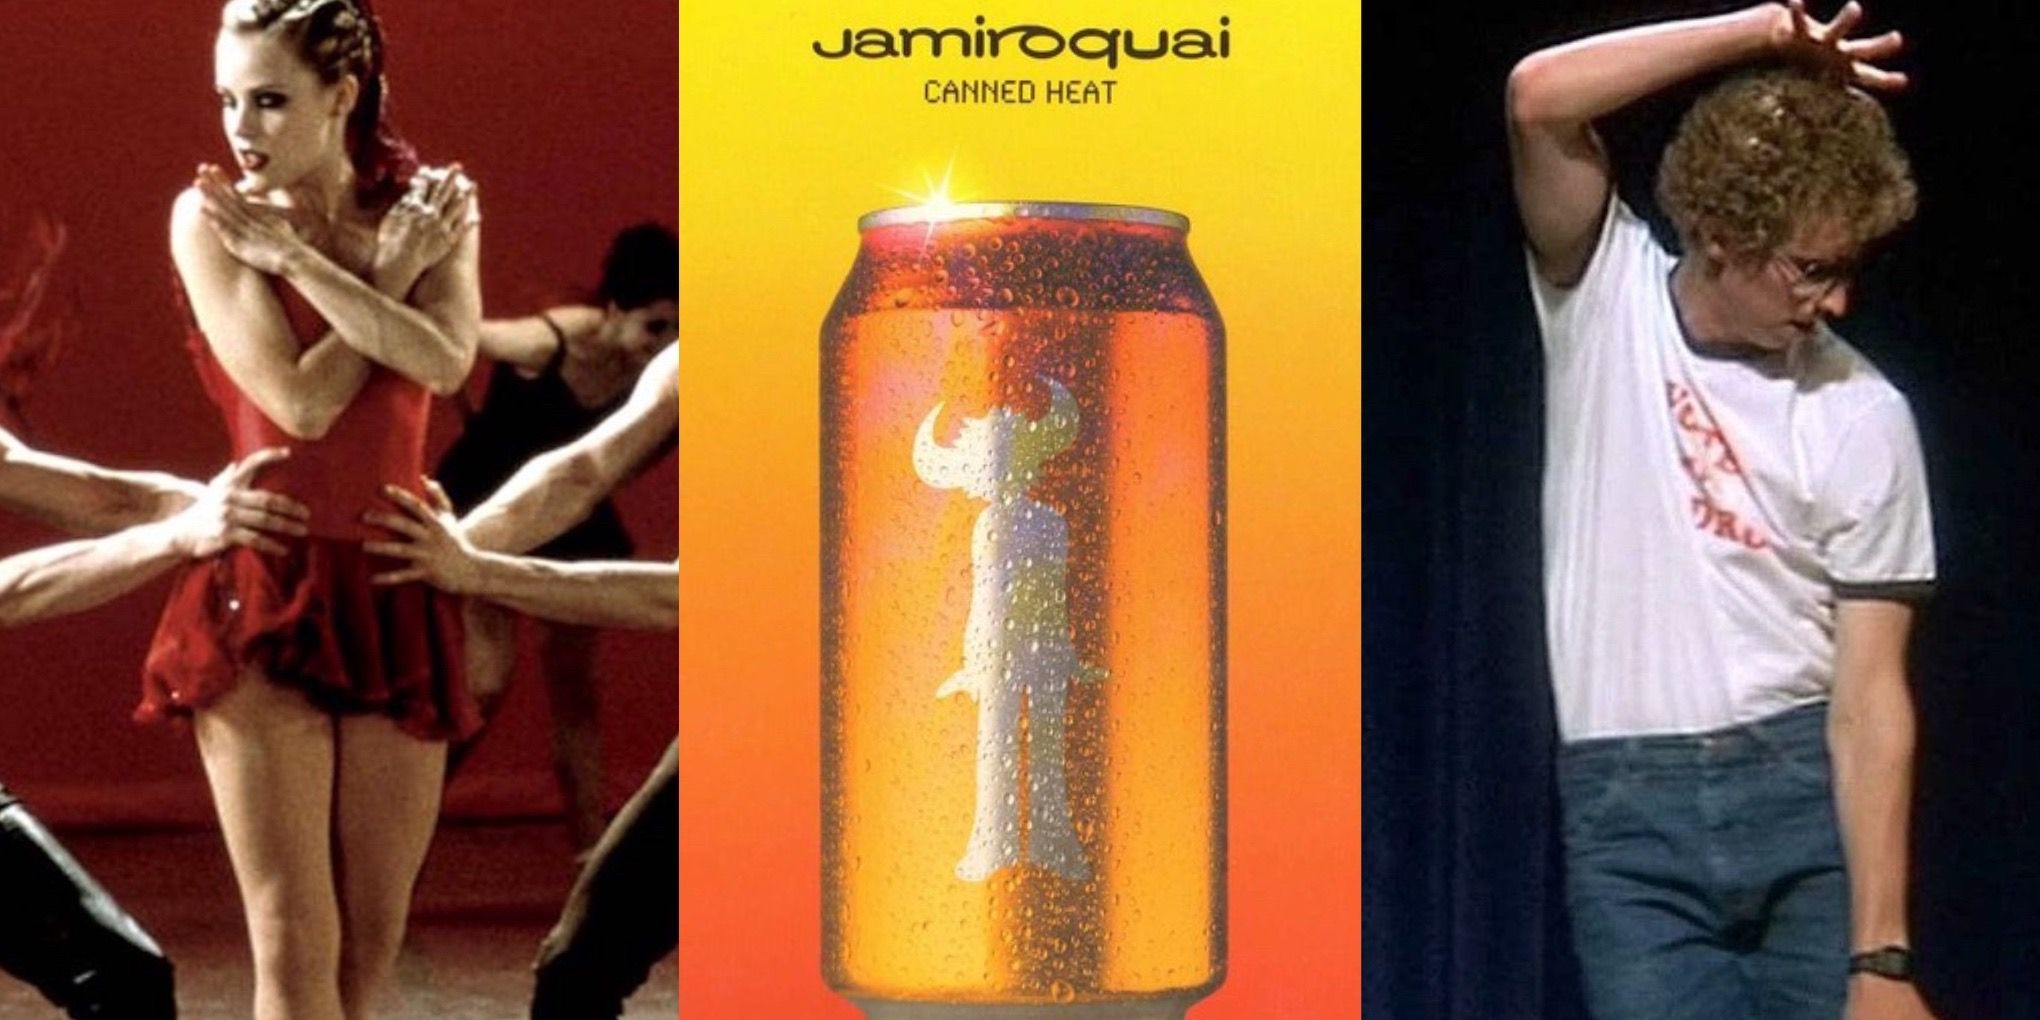 Canned Heat by Jamiroquai in Center Stage and Napoleon Dynamite